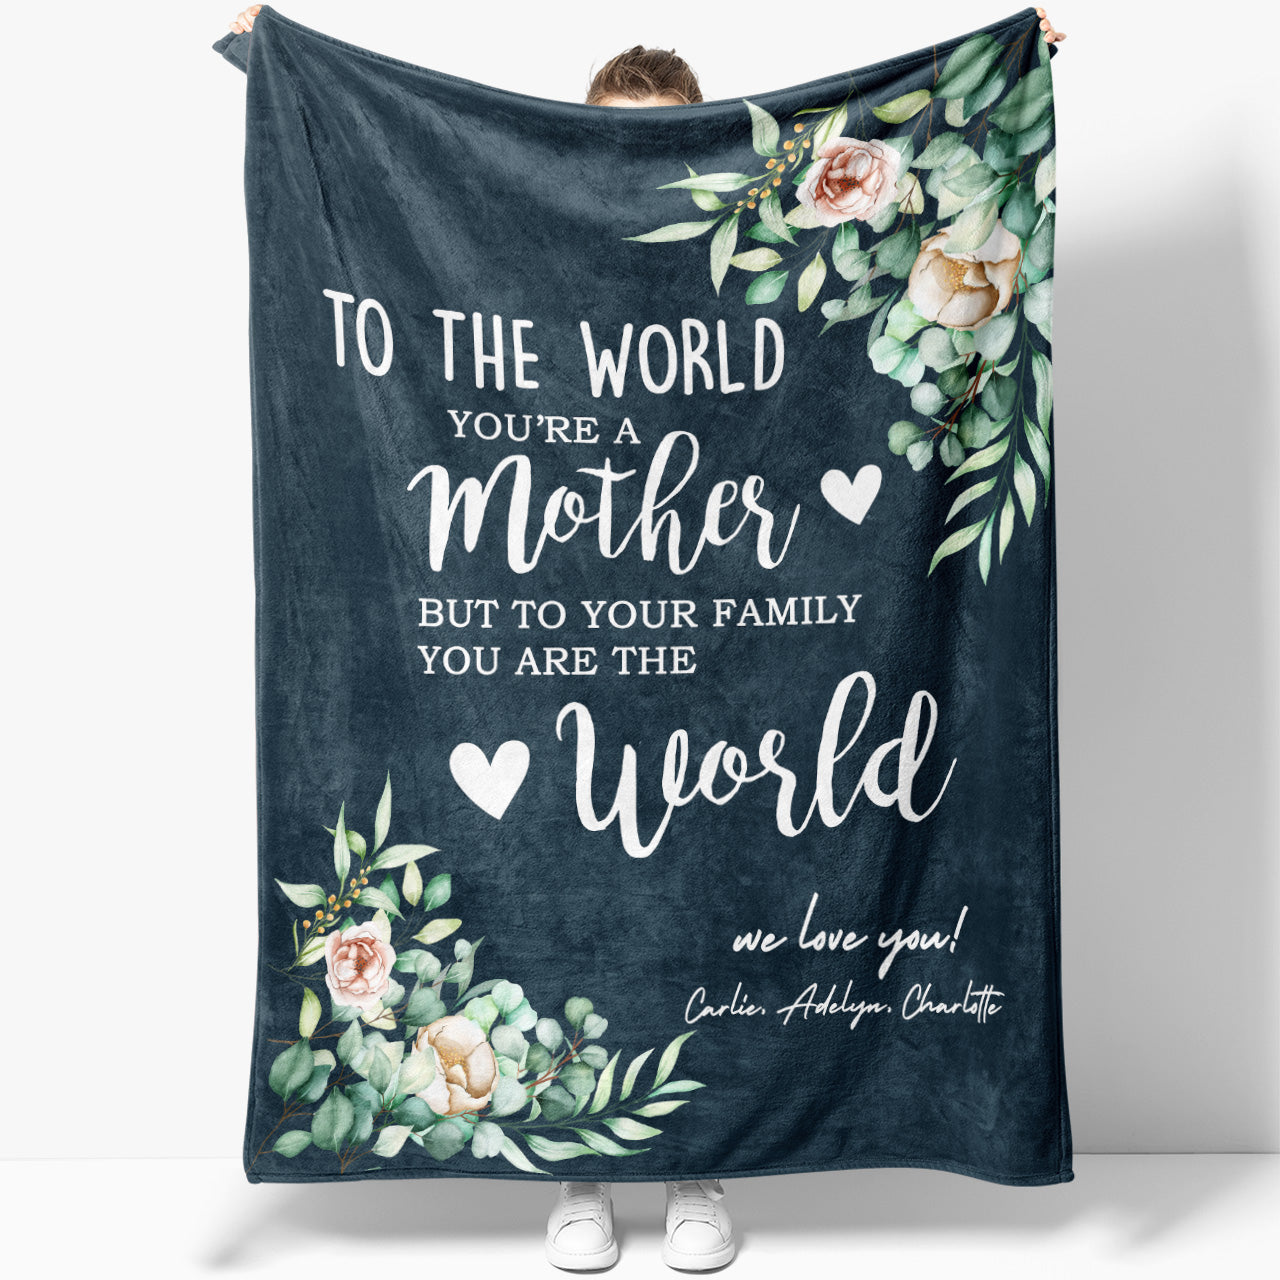 To My Mom Blanket Mothers Day Gift Ideas, To The World Youre A Mom You Are The World Blanket